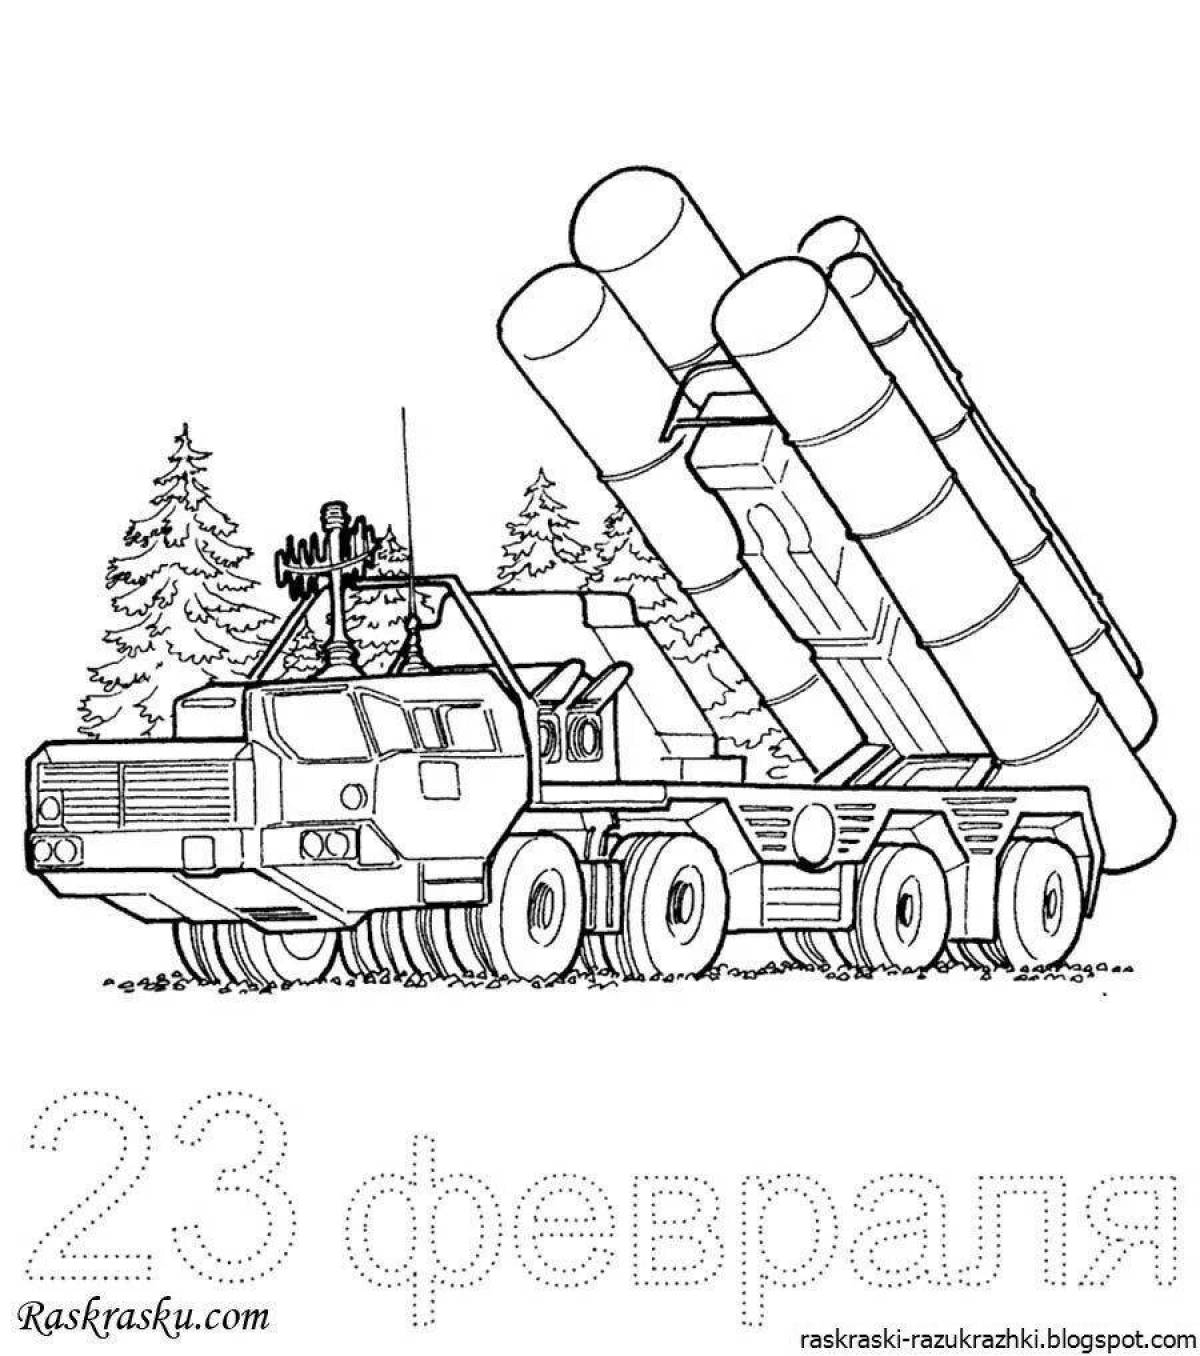 Attractive pre-k military vehicle coloring page